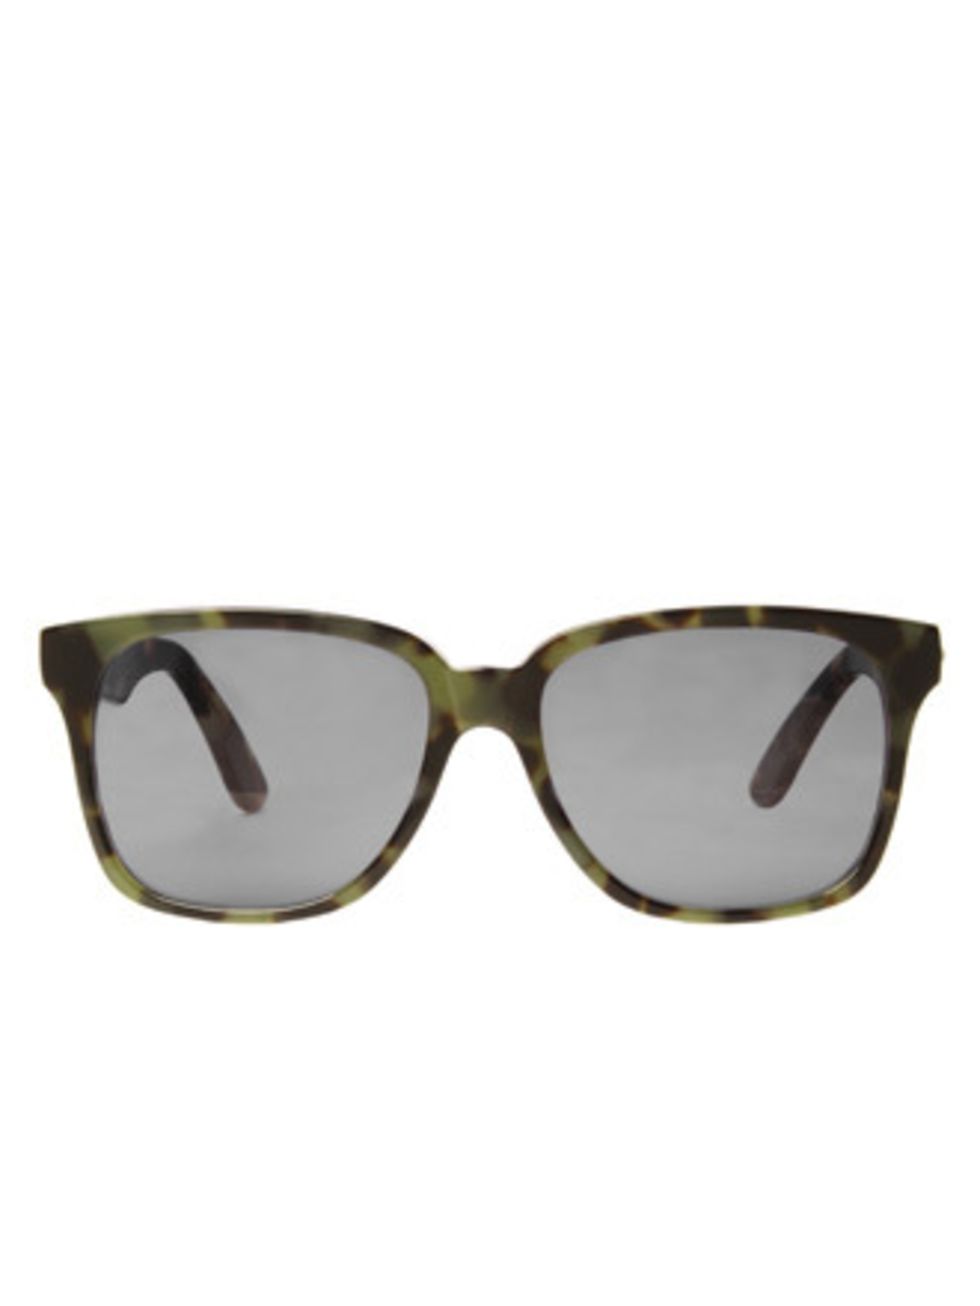 <p>Kurt Geiger has been tempting us with shoes, boots and sandals since 1963. Now they have branched out into sunglasses. We cant resist this green and brown tortoiseshell pair.</p><p>Sunglasses, £160 by <a href="http://www.kurtgeiger.com/online-shop/167